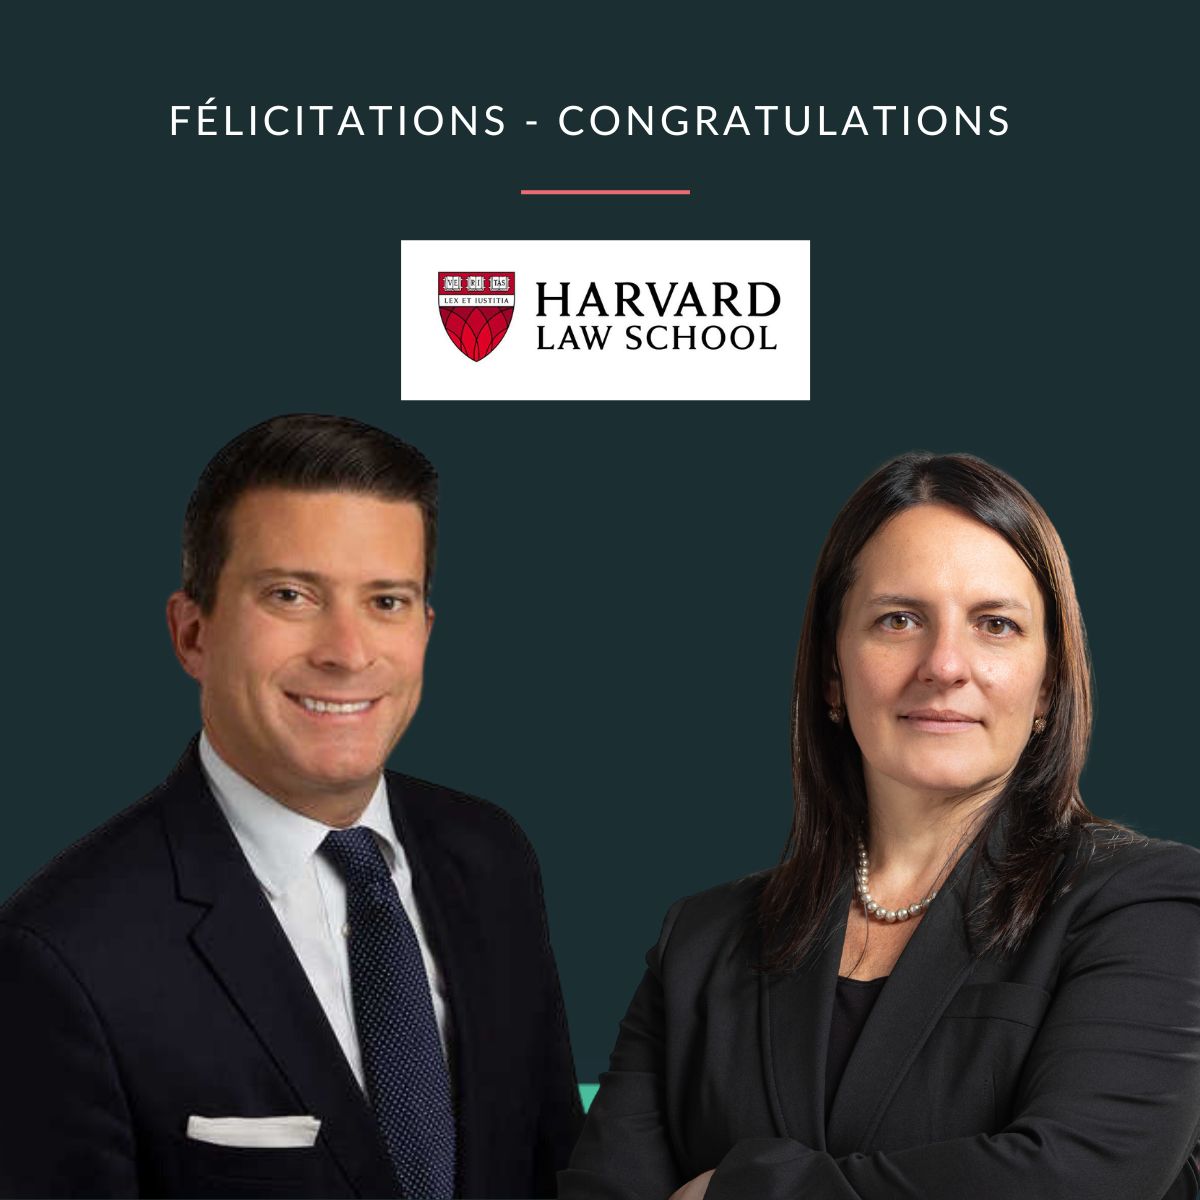 Two lawyers completed Harvard Law School’s Program on Negotiation